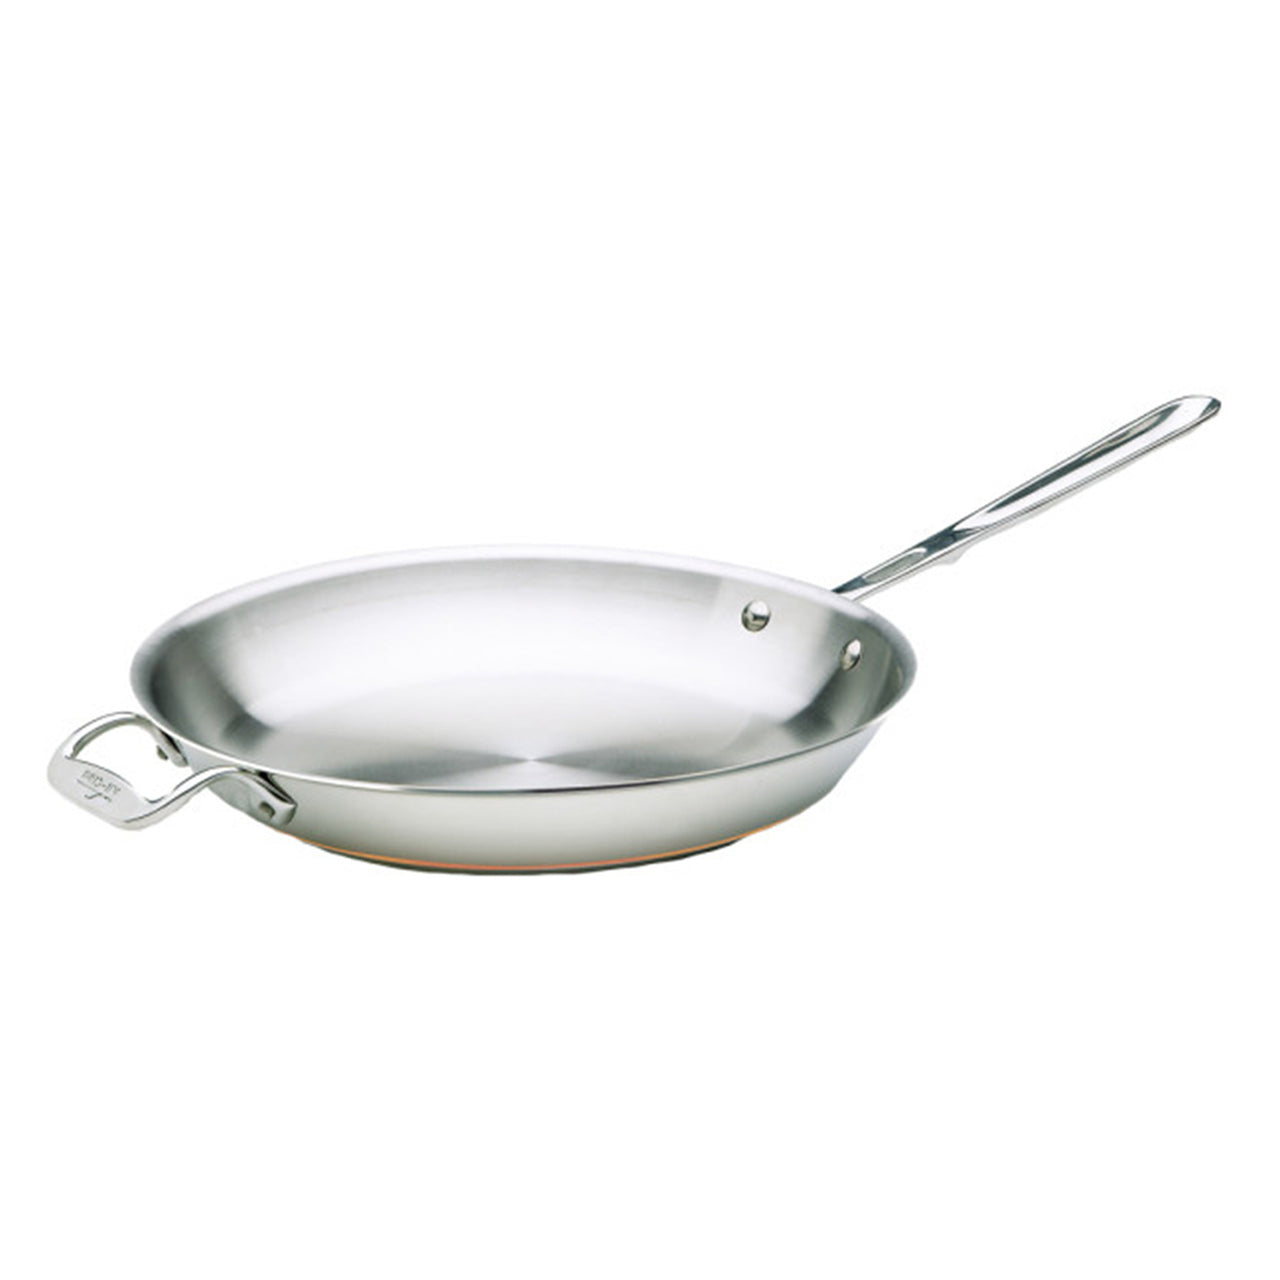 https://cdn.shopify.com/s/files/1/0449/8065/products/all-clad-copper-core-fry-pan-12-inch__63907.1511049231.jpg?v=1634011679&width=1280